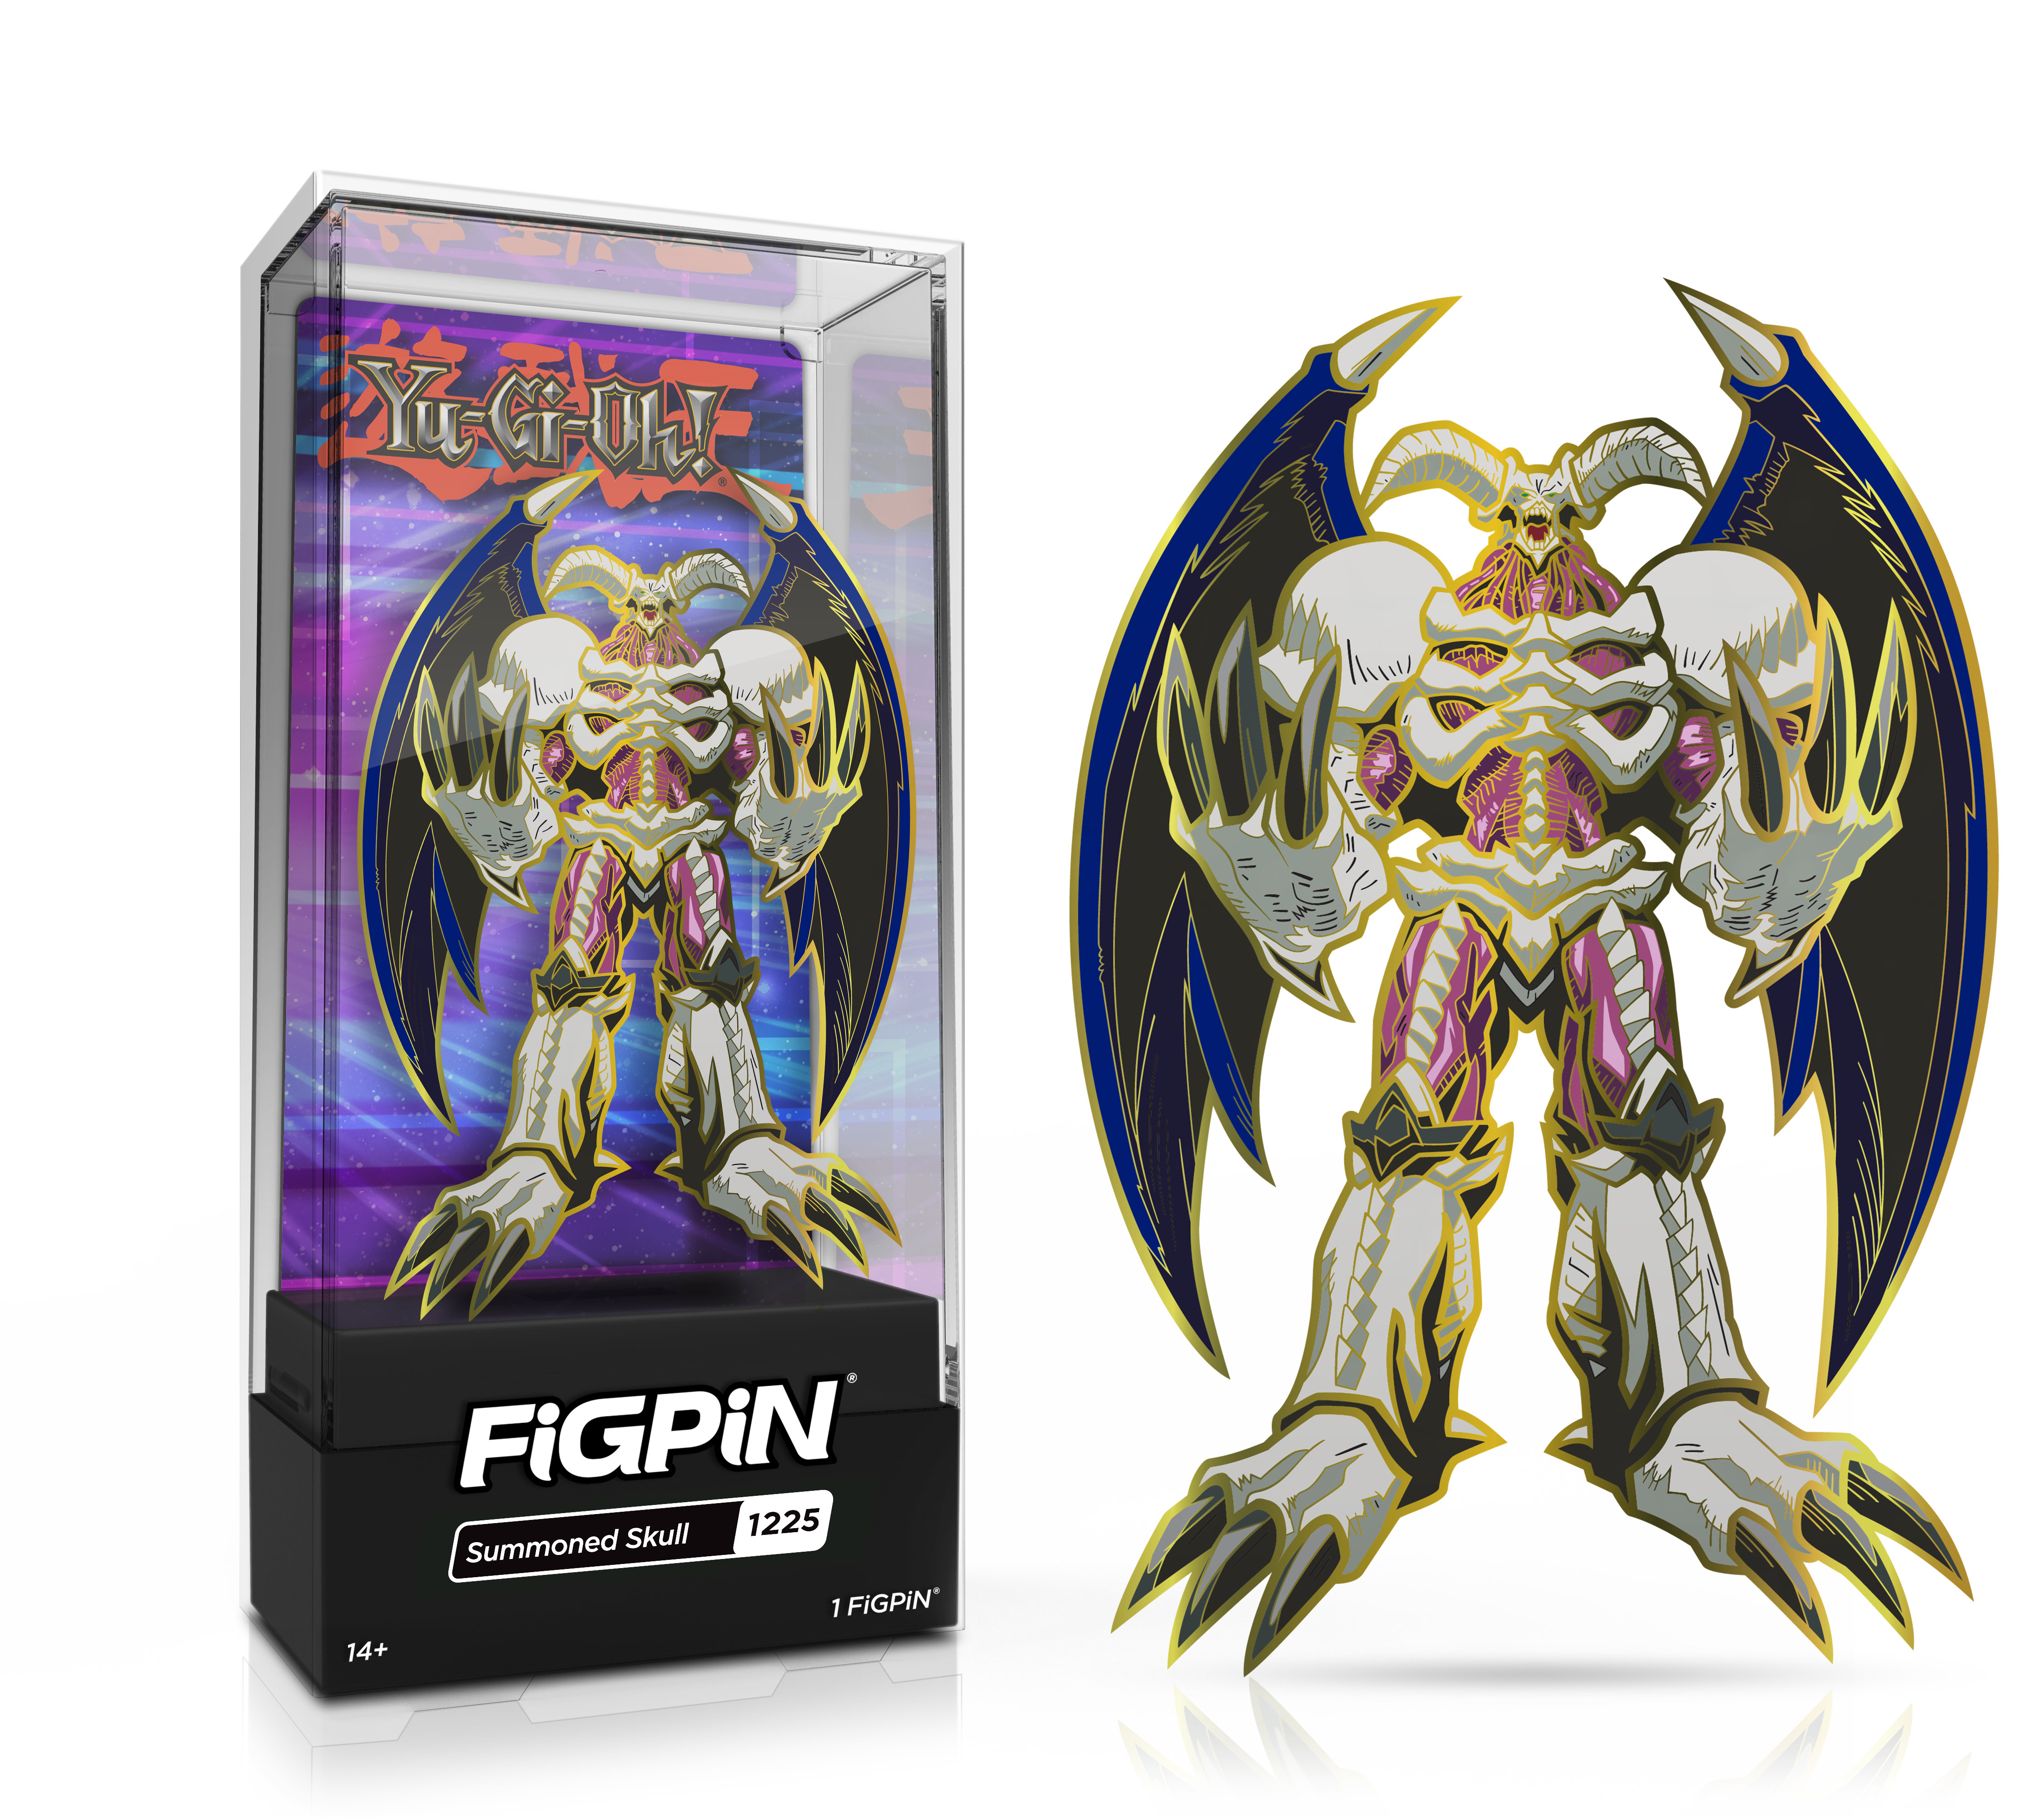 Side by side view of the Summoned Skull enamel pin in display case and the art render.